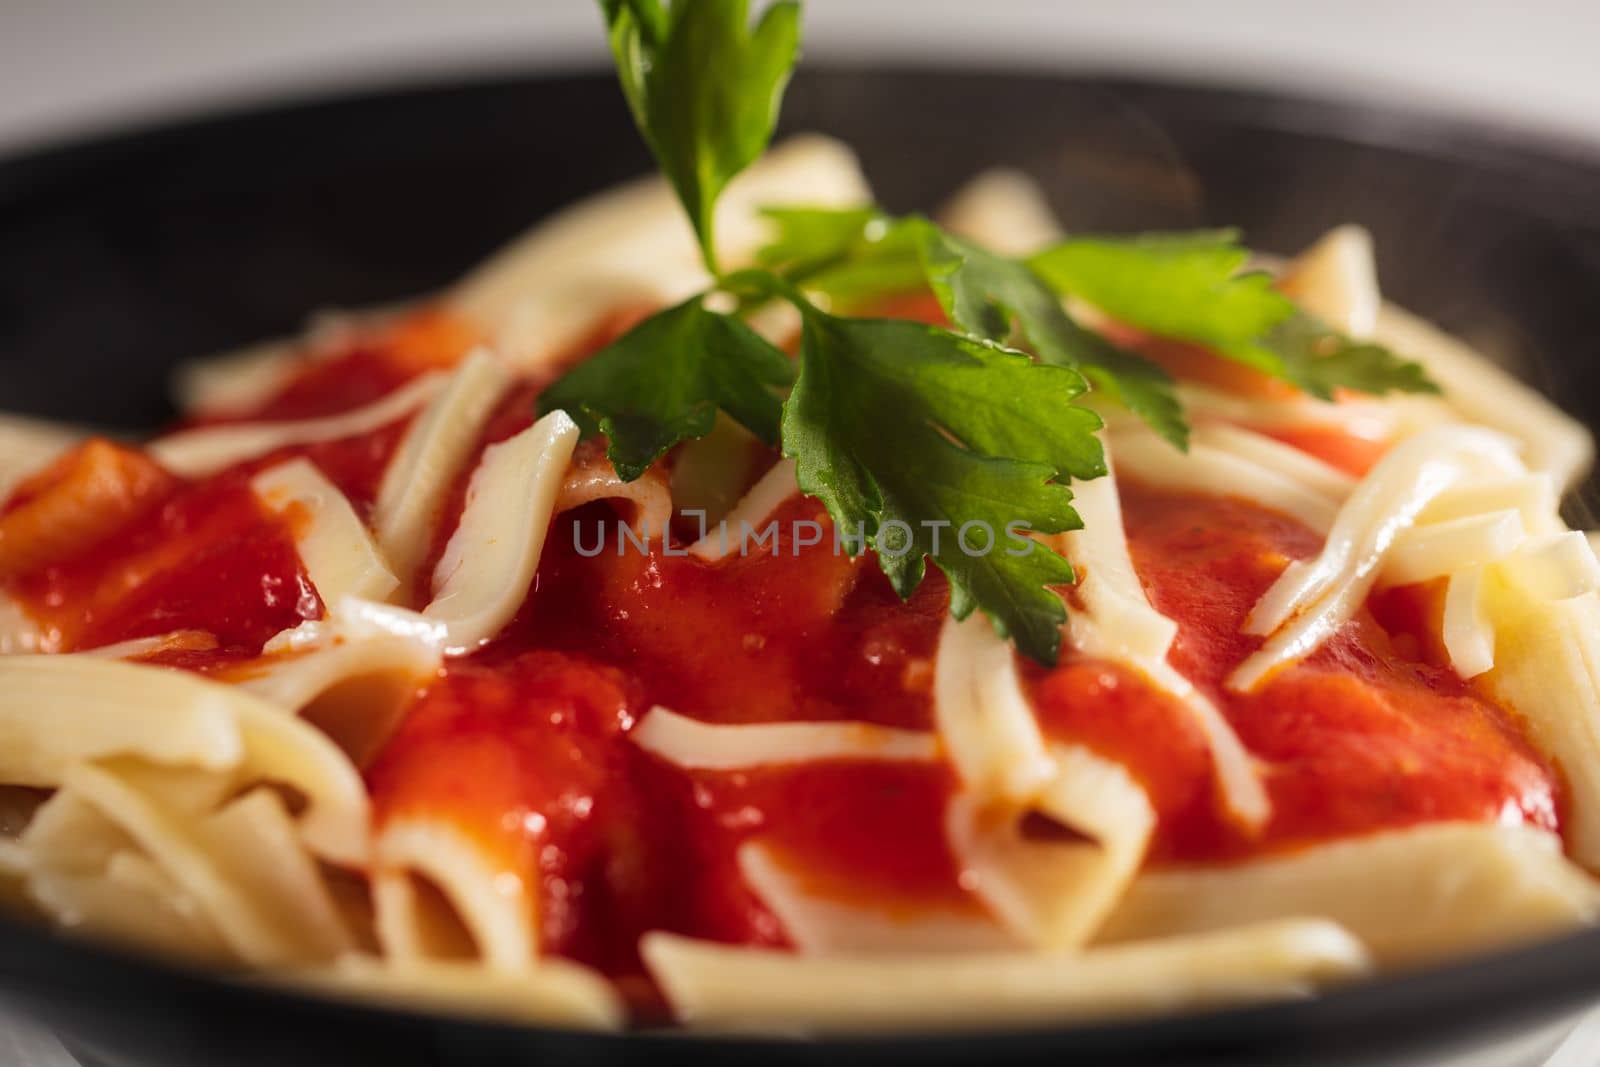 Pasta with Napoliten sauce - Penne. High quality photo